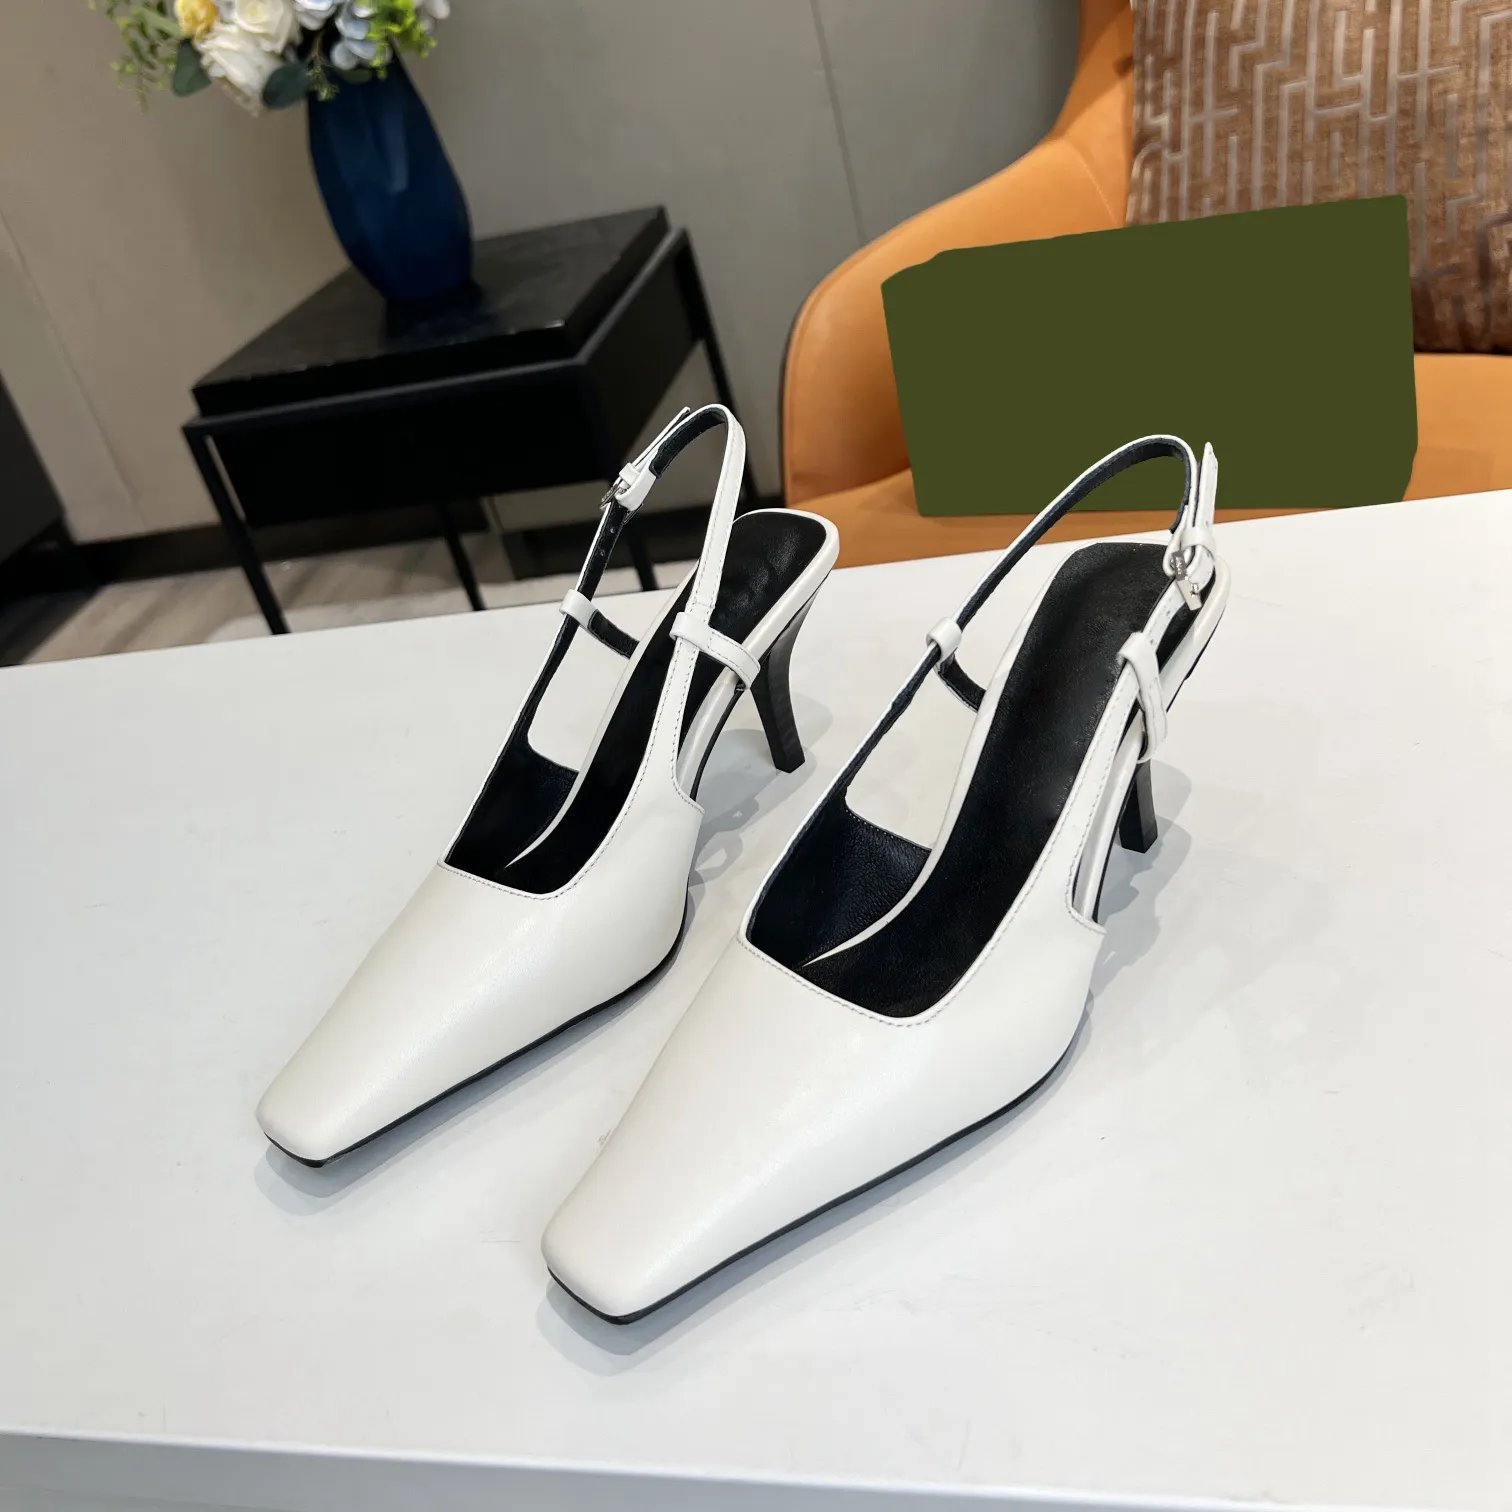 High Heels Shoes Wedding Pumps Shiny Pointed Toe Sole Nude Black Leather Lady Classics Women With Box